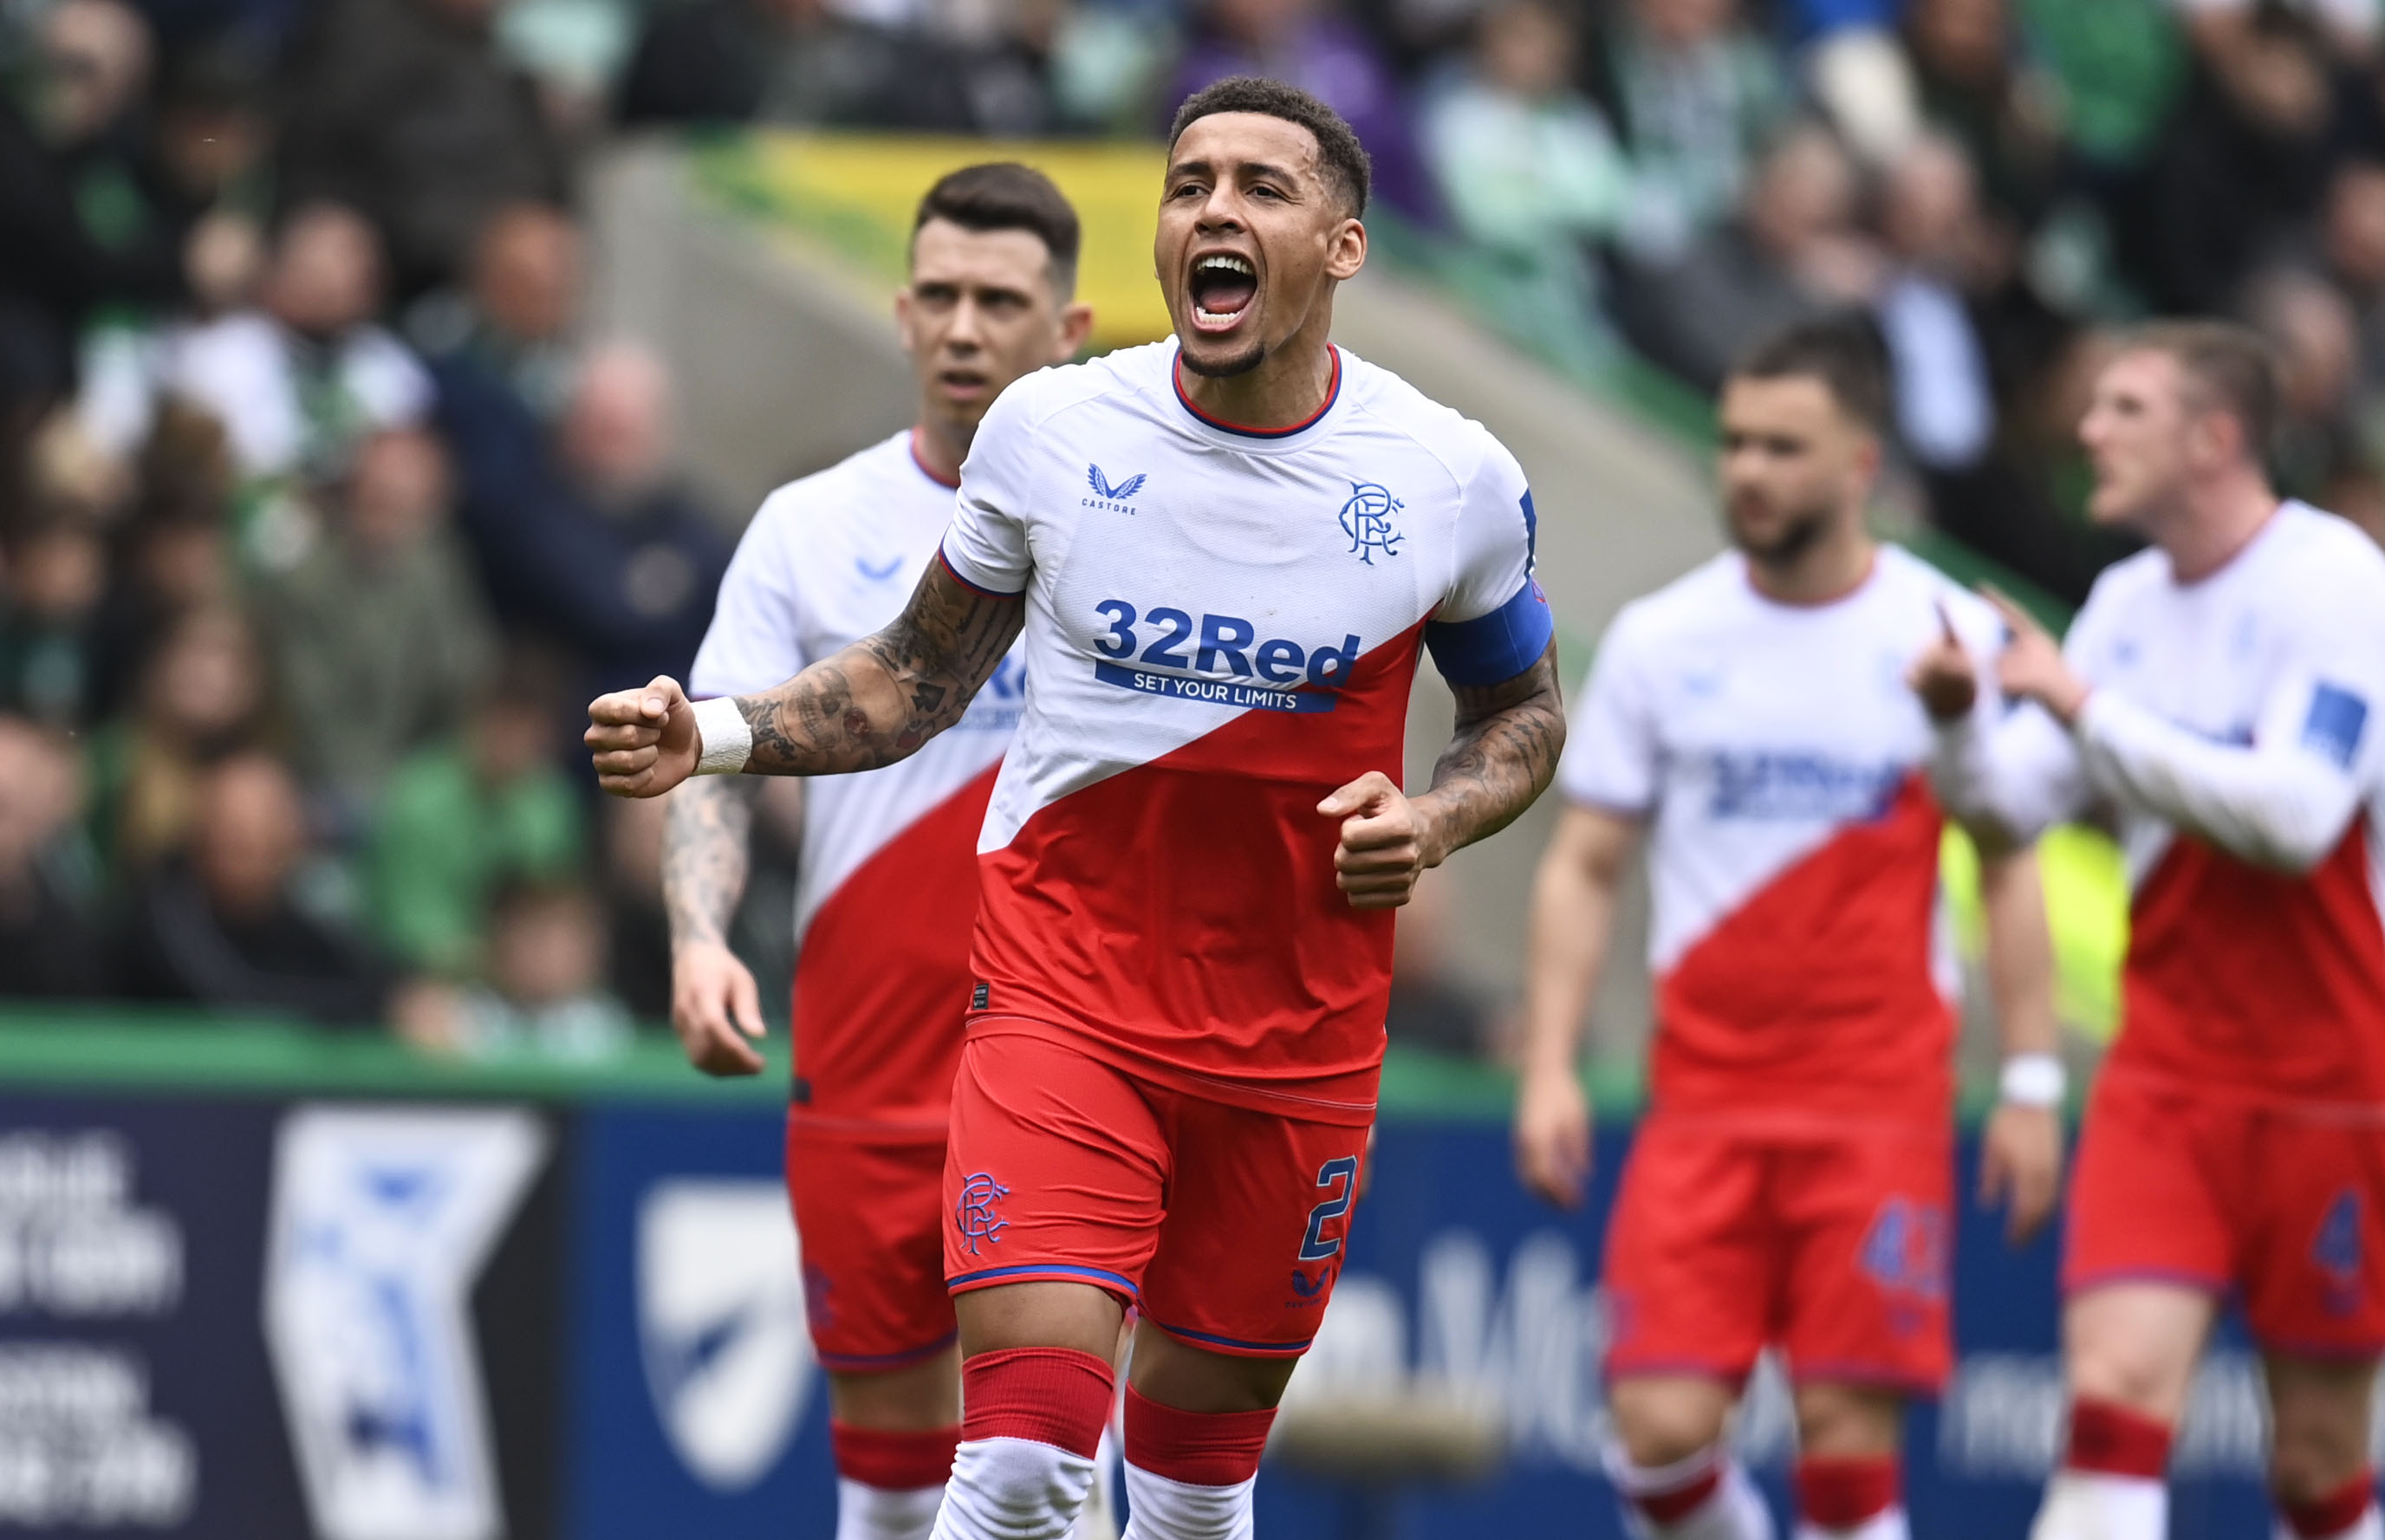 Rangers lead as captain Tavernier marks 400th game with goal